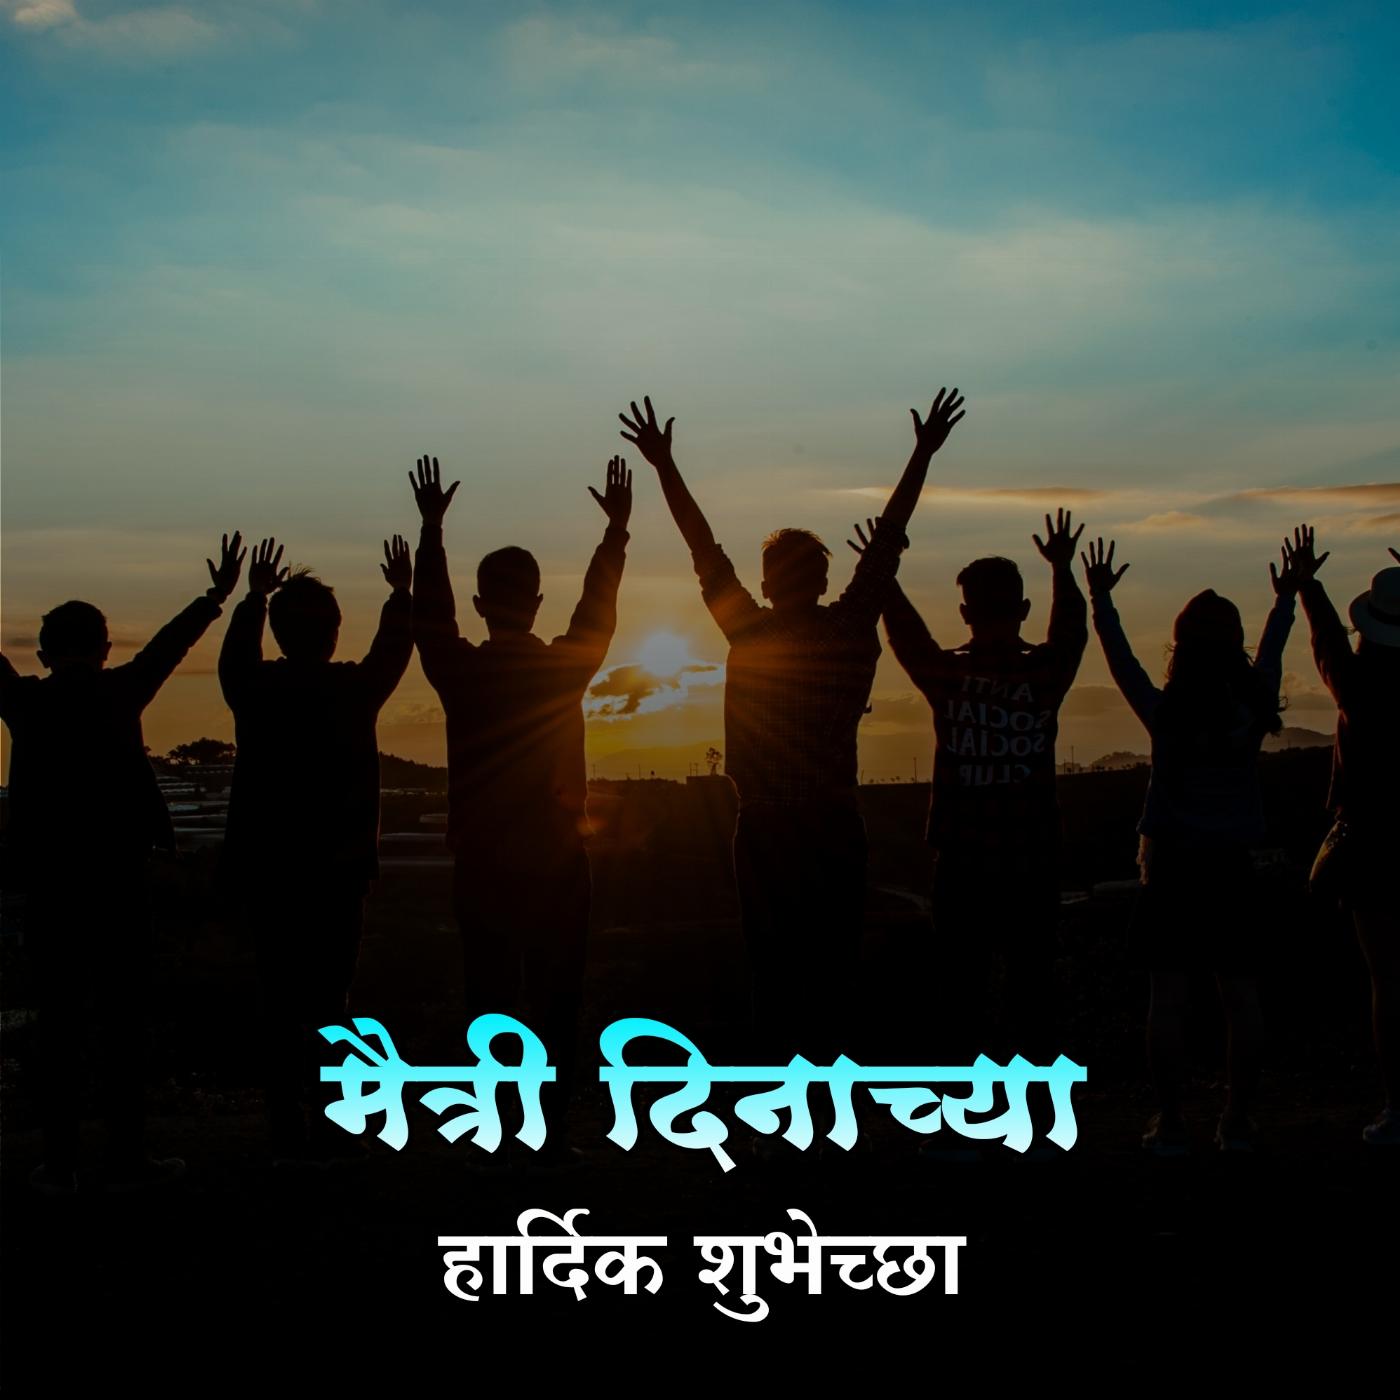 Happy Friendship Day Images in Marathi